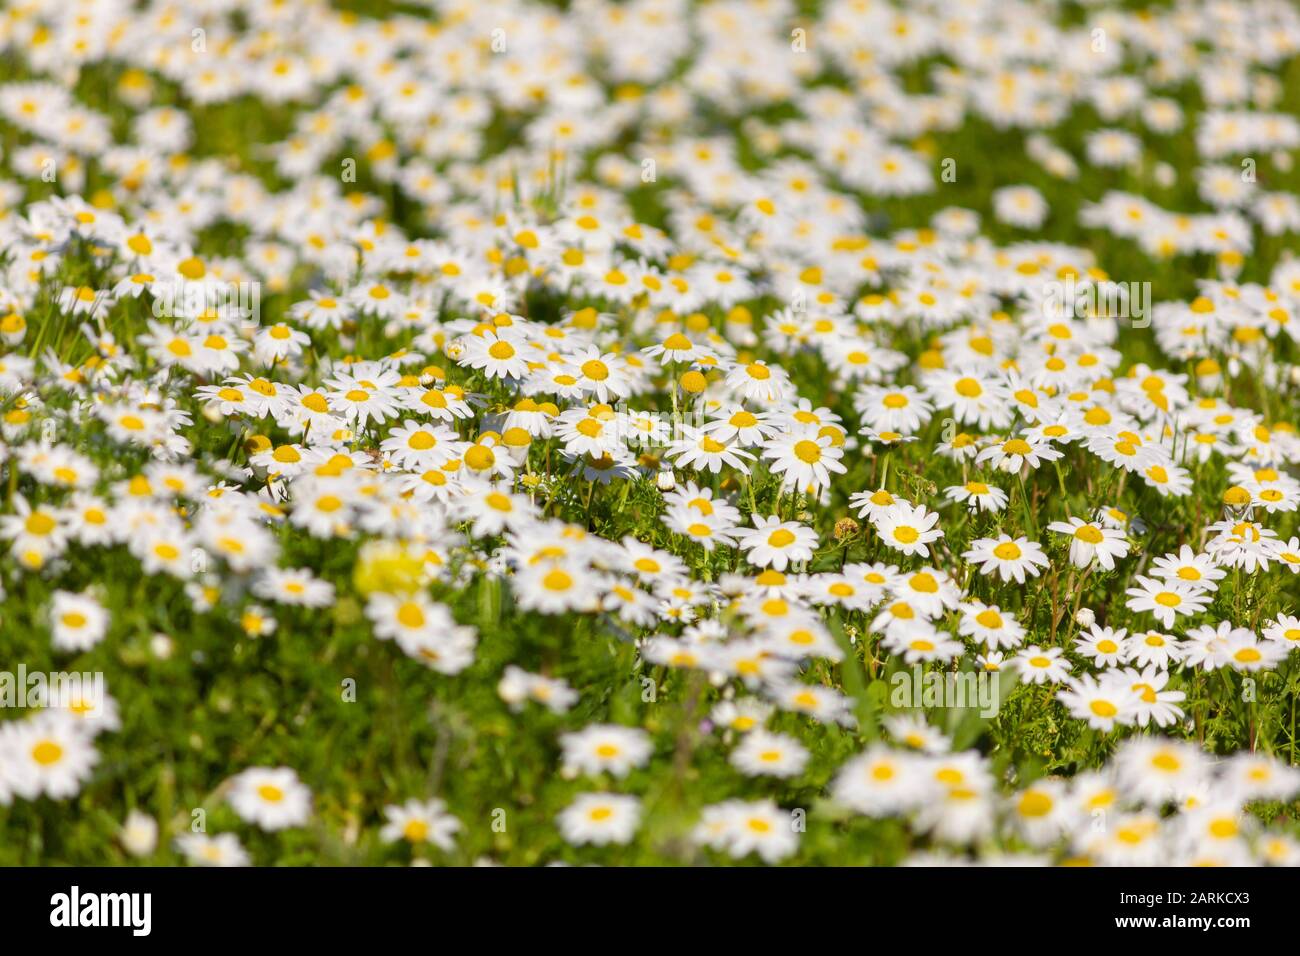 Daisies field in a sunny winter day Stock Photo